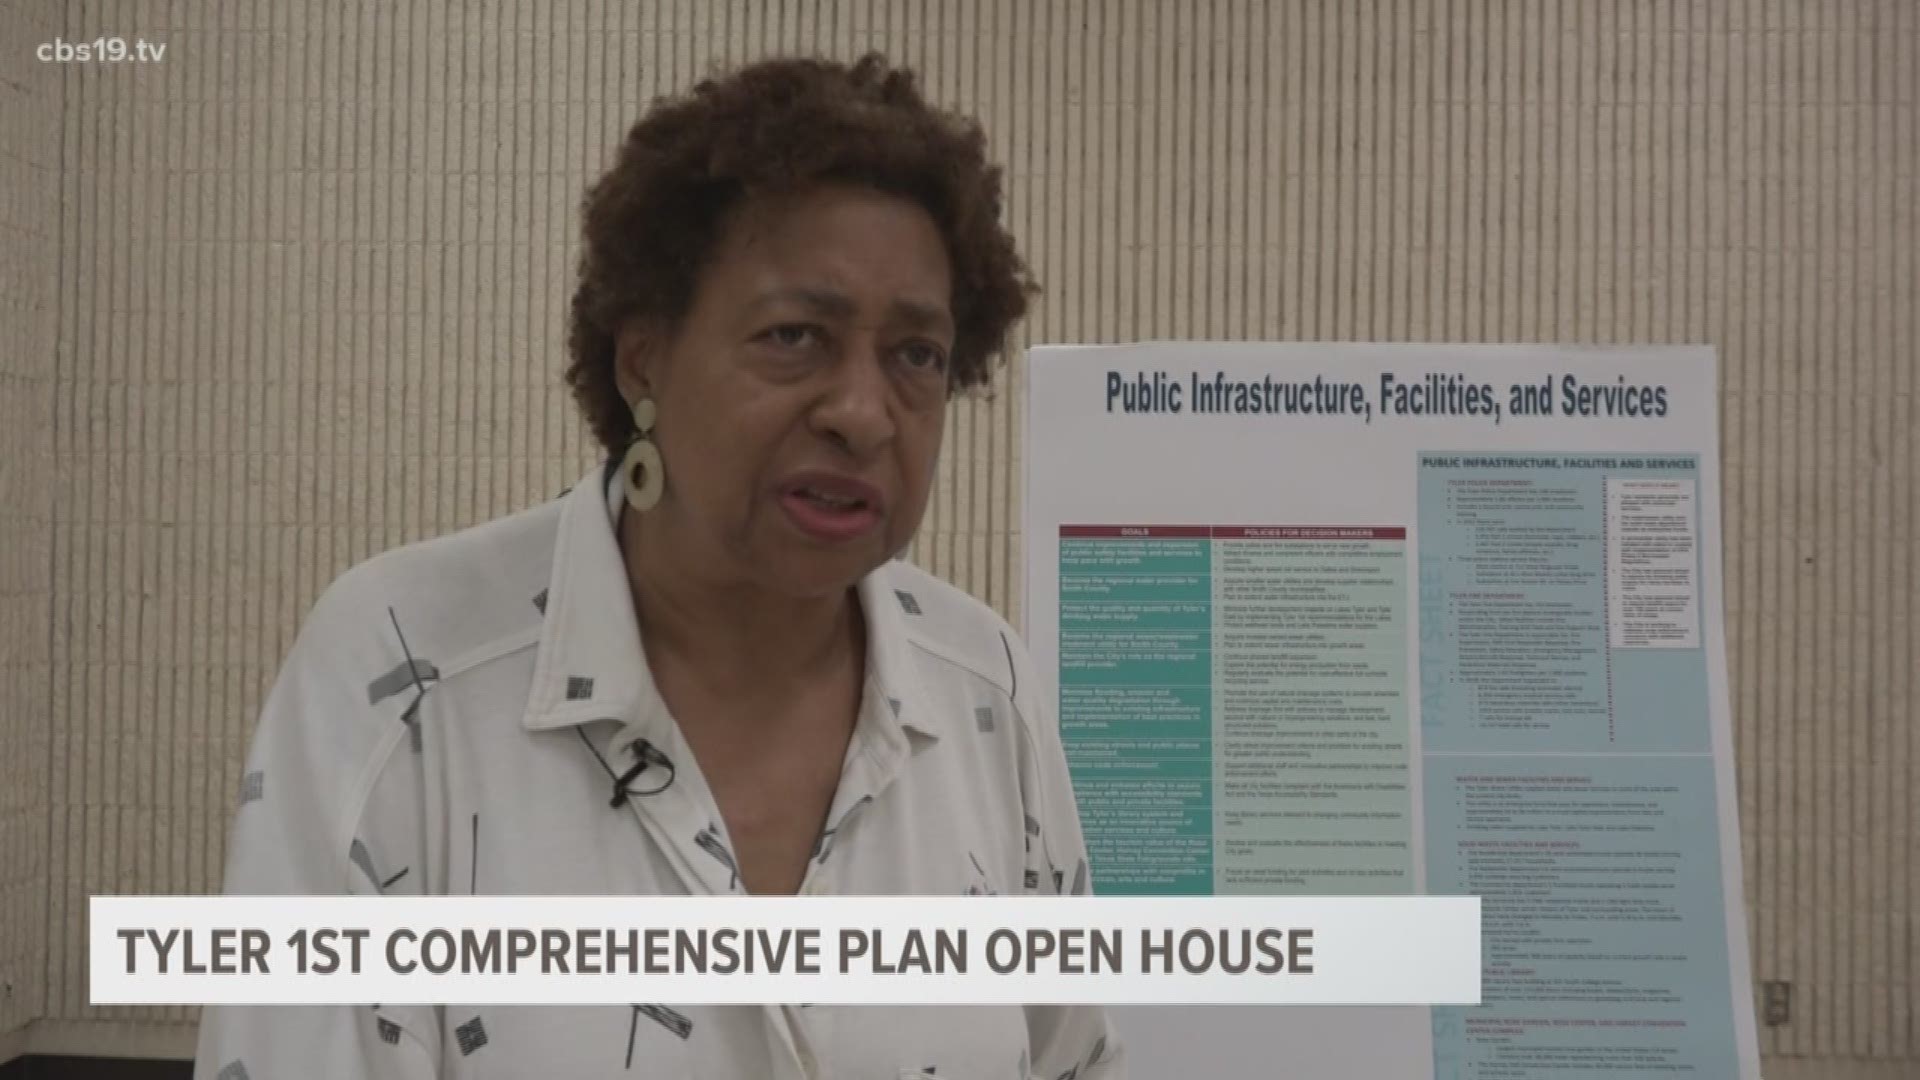 City of Tyler hosts "Open-House" to receive input on North Tyler revitalization